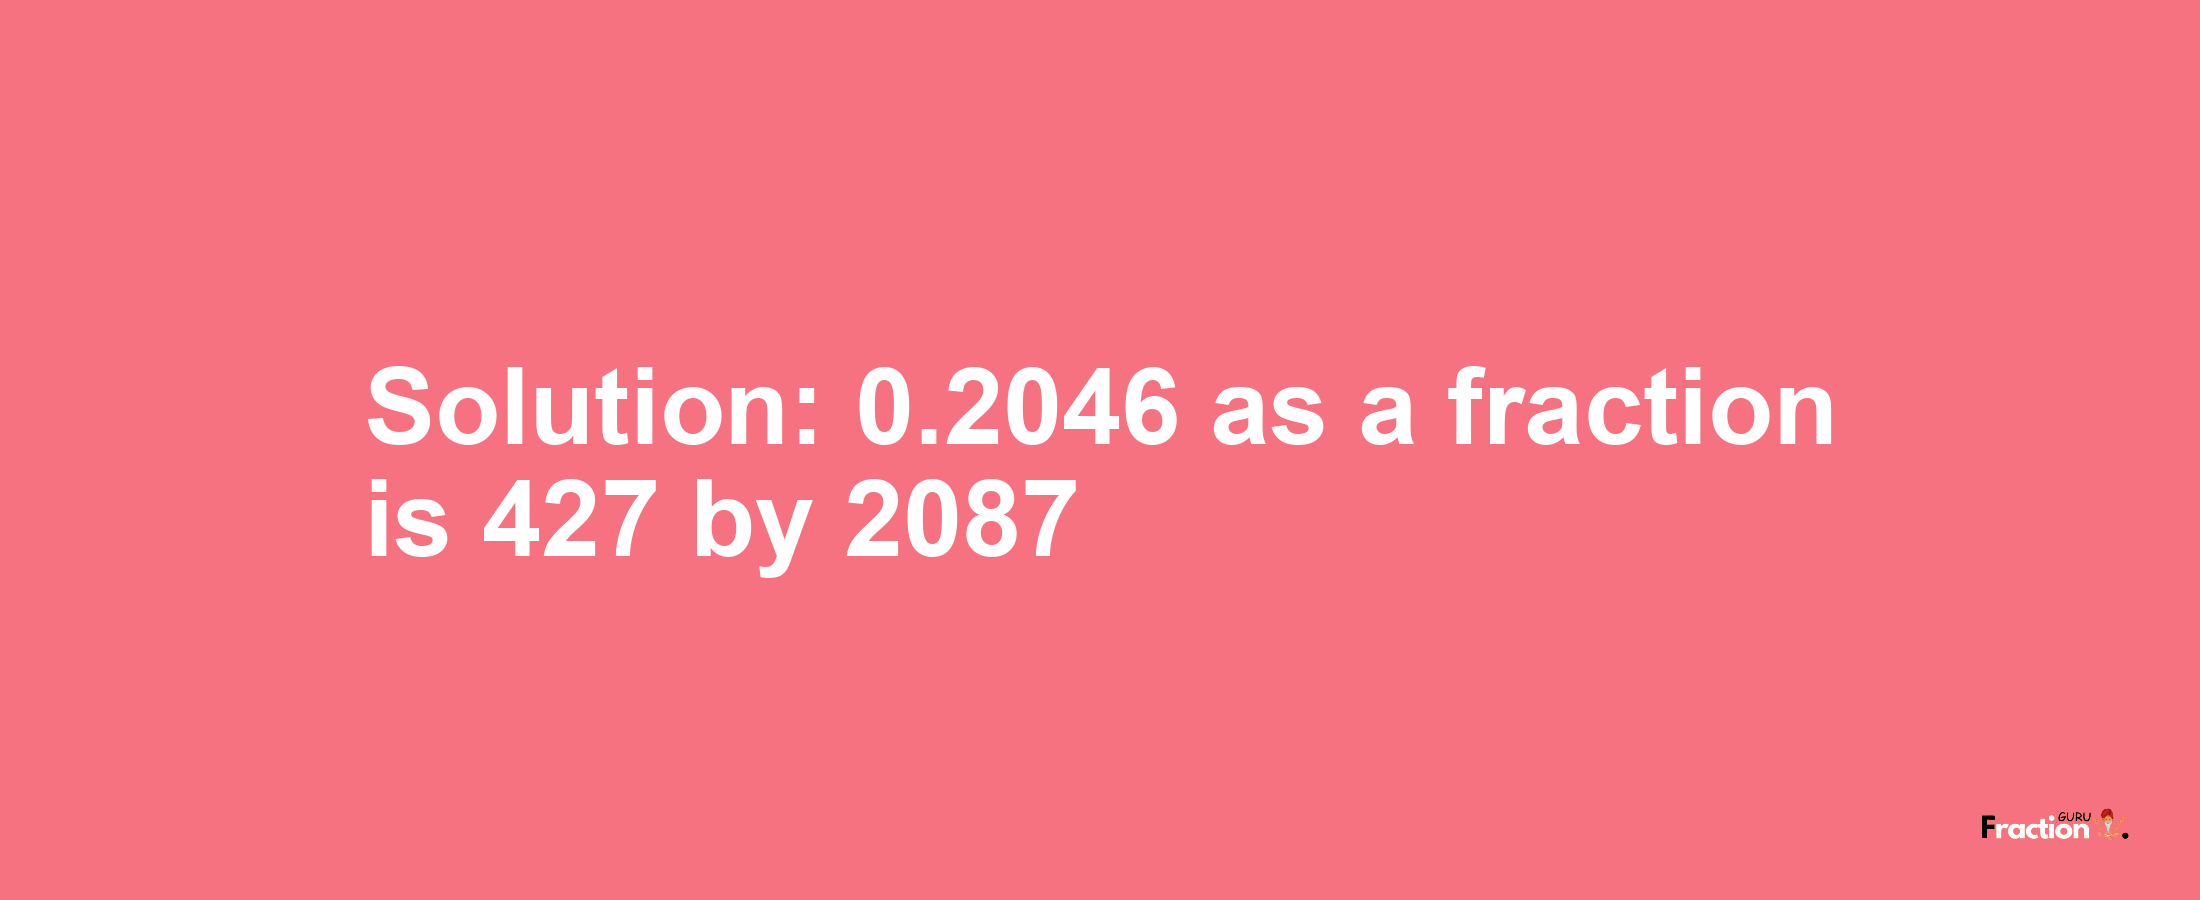 Solution:0.2046 as a fraction is 427/2087